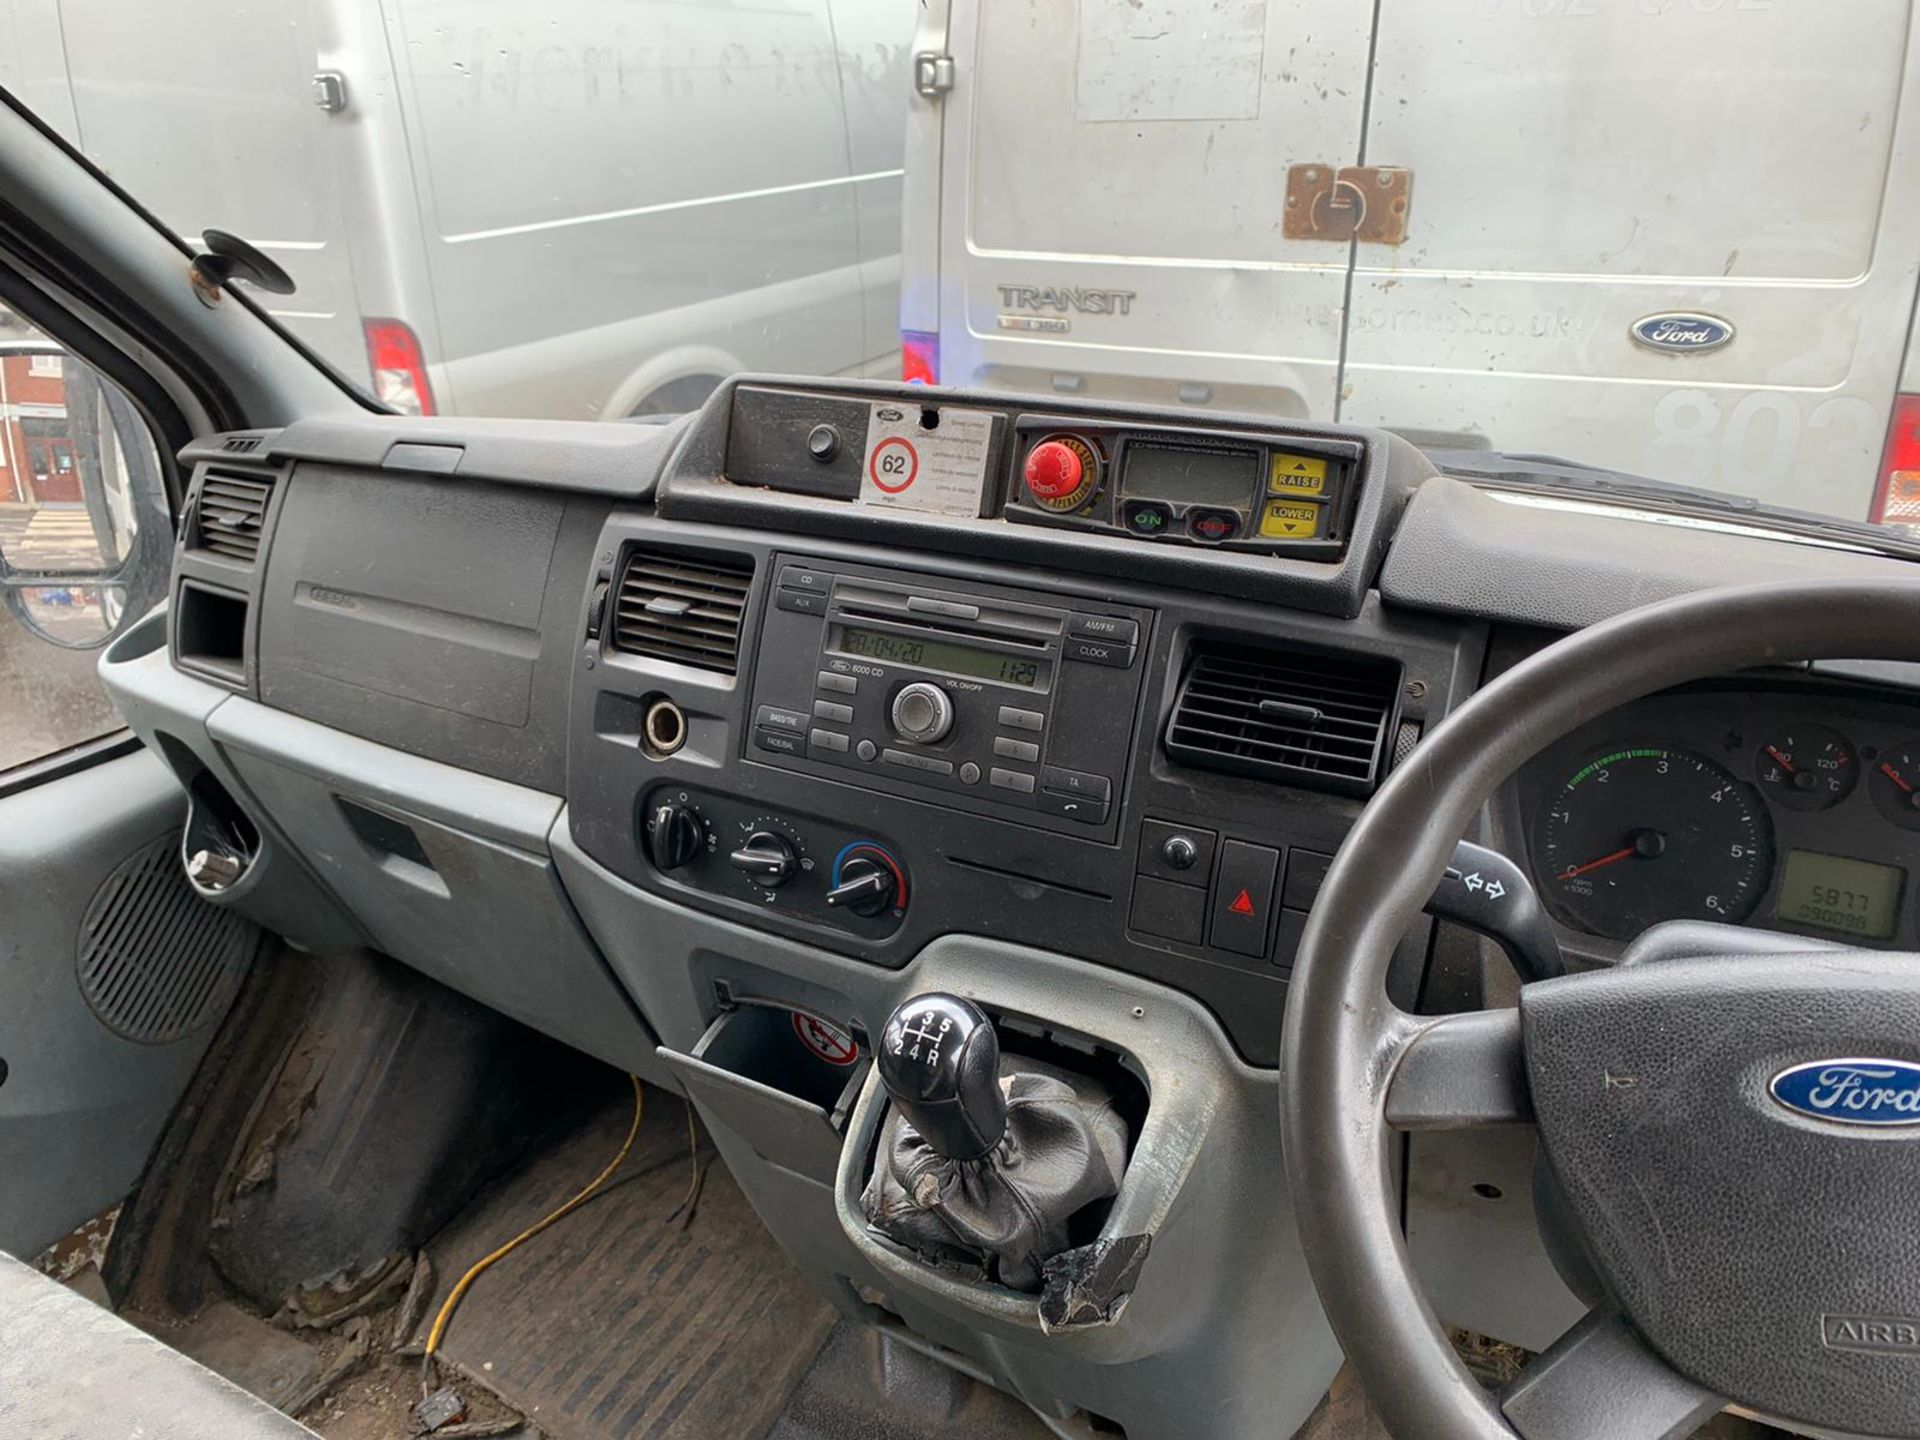 YR57 YLX Ford Transit Tipper - Image 10 of 30